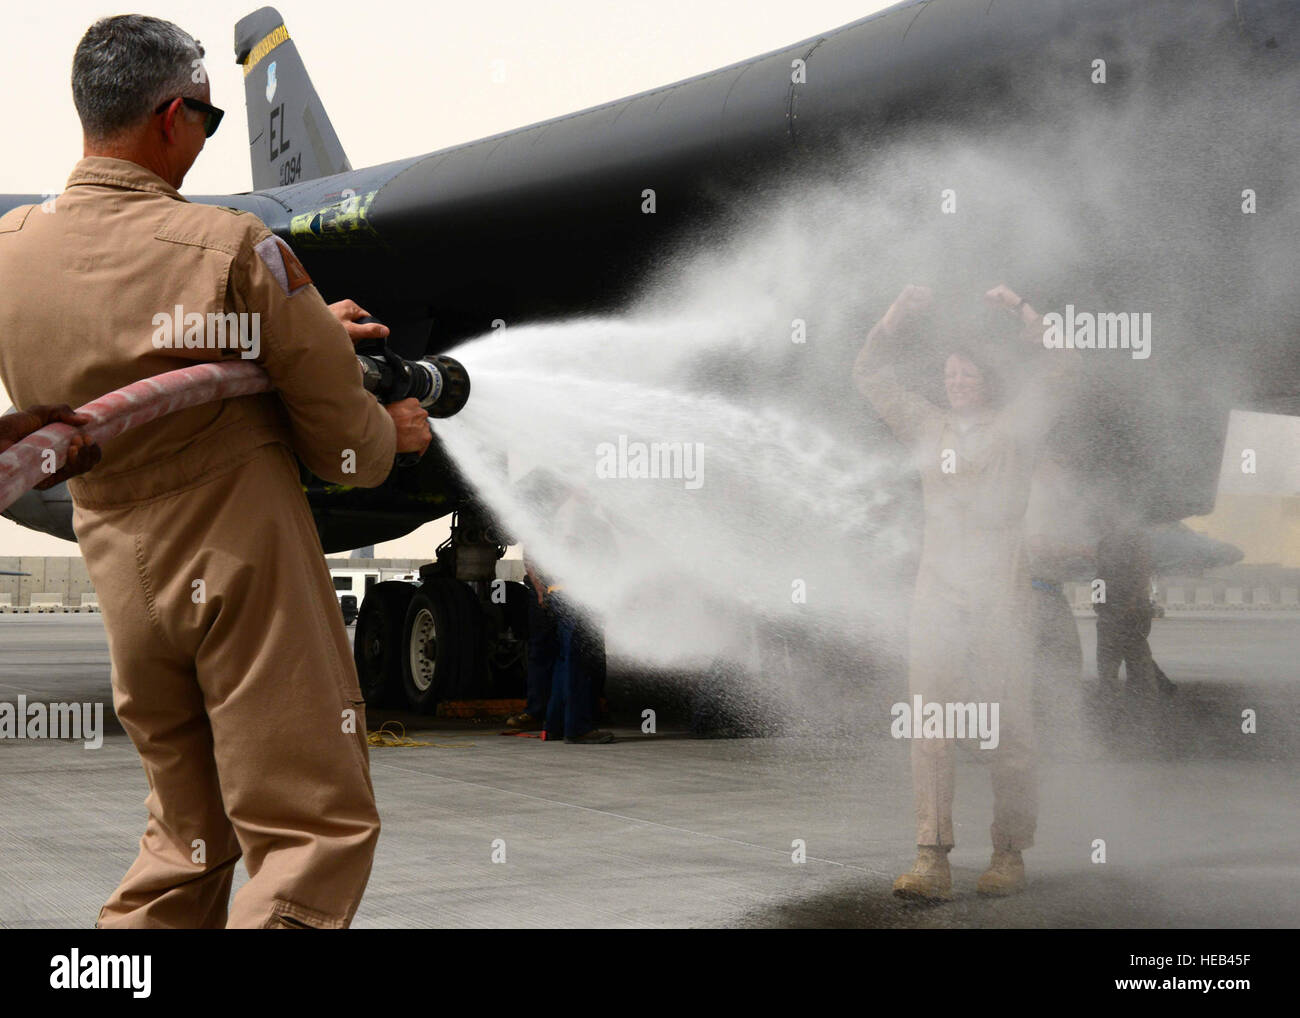 U.S. Air Force Brig. Gen. Roger H. Watkins, 379th Air Expeditionary Wing commander, sprays Col. Jennifer Fullmer, 379th AEW vice commander after a fini flight at Al Udeid Air Base, Qatar, May 11, 2013. The USAF has a tradition where aircrews, on the completion of a final flight in an aircraft, are hosed with water by their comrades before being toasted. Watkins is from Fort Worth, Texas. Fullmer hails from Wilton, Conn.  Staff Sgt. Ciara Wymbs) Stock Photo